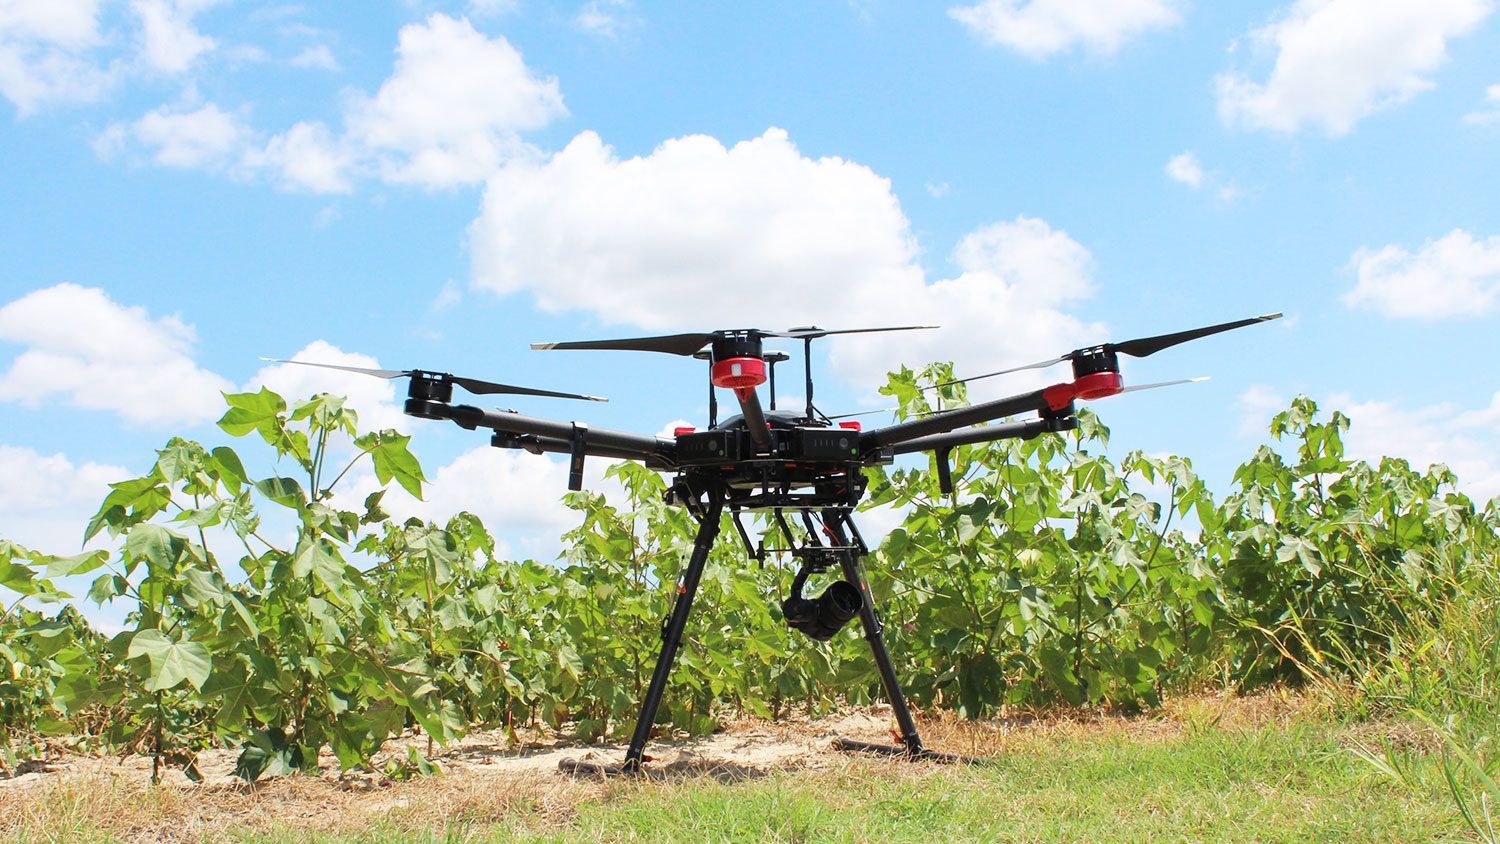 Unmanned Aerial Vehicle in a field